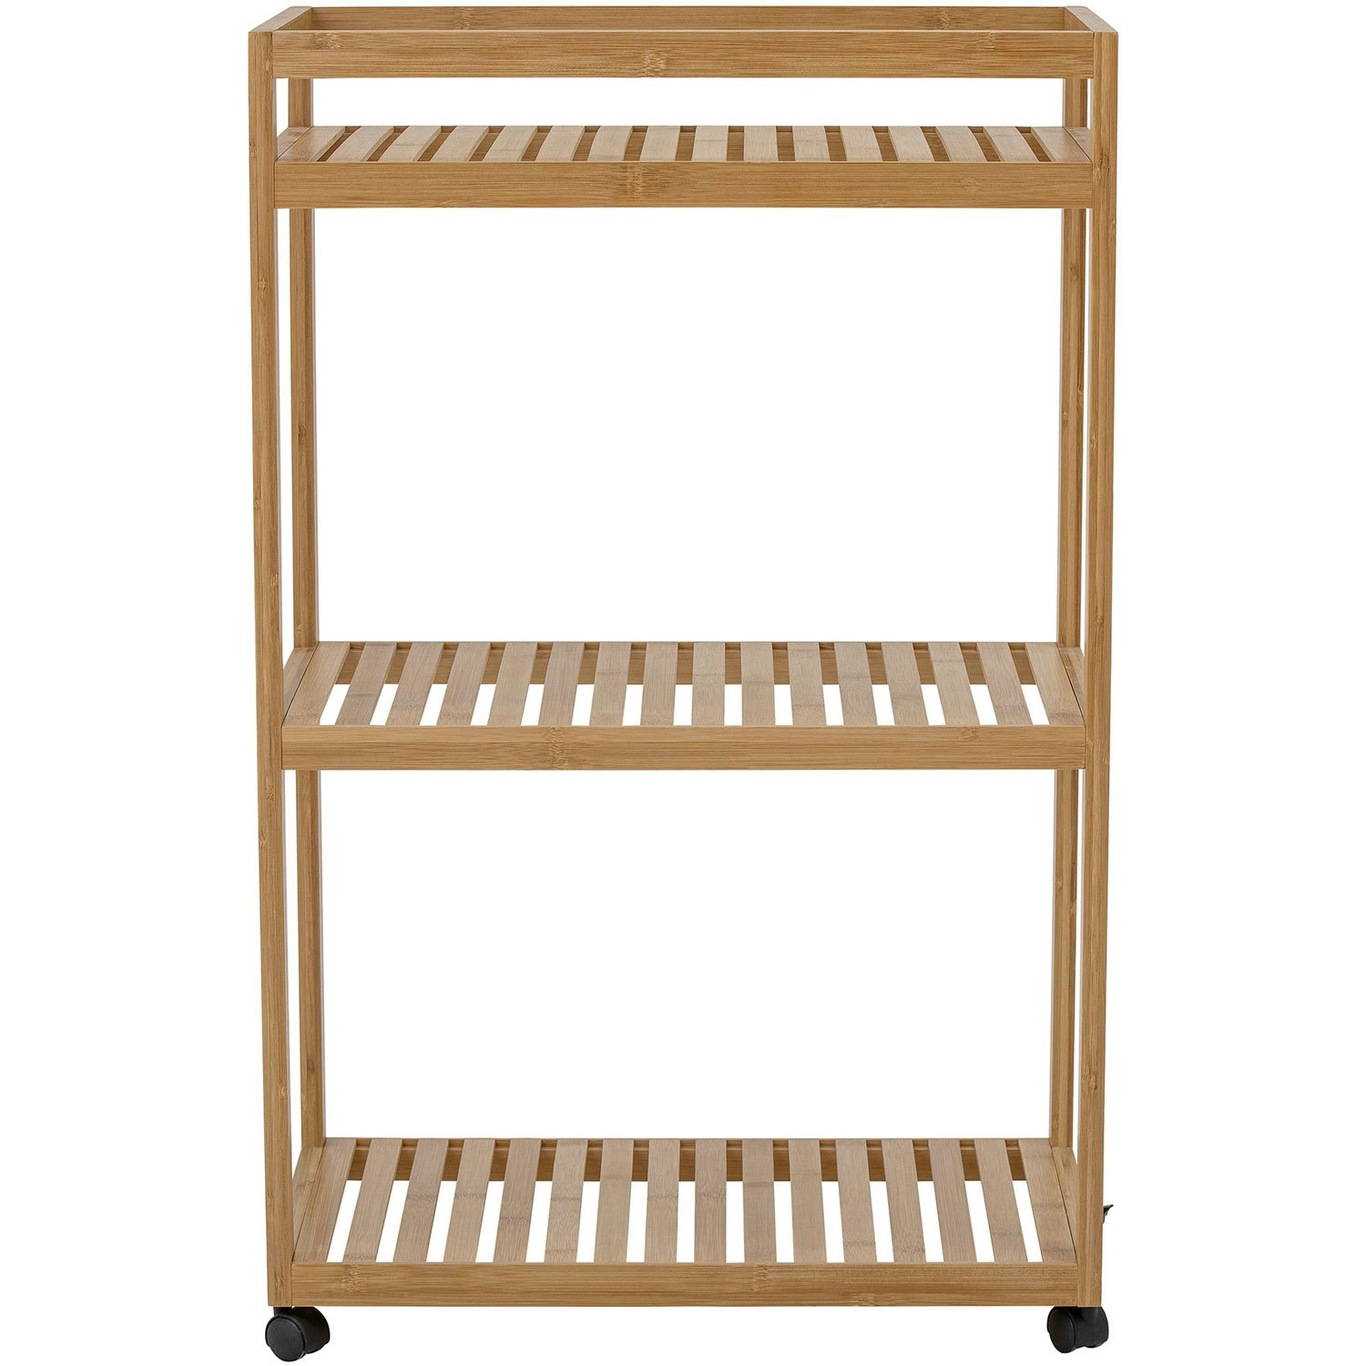 Aden Shelf With Wheels Bamboo 85x55 cm, Nature